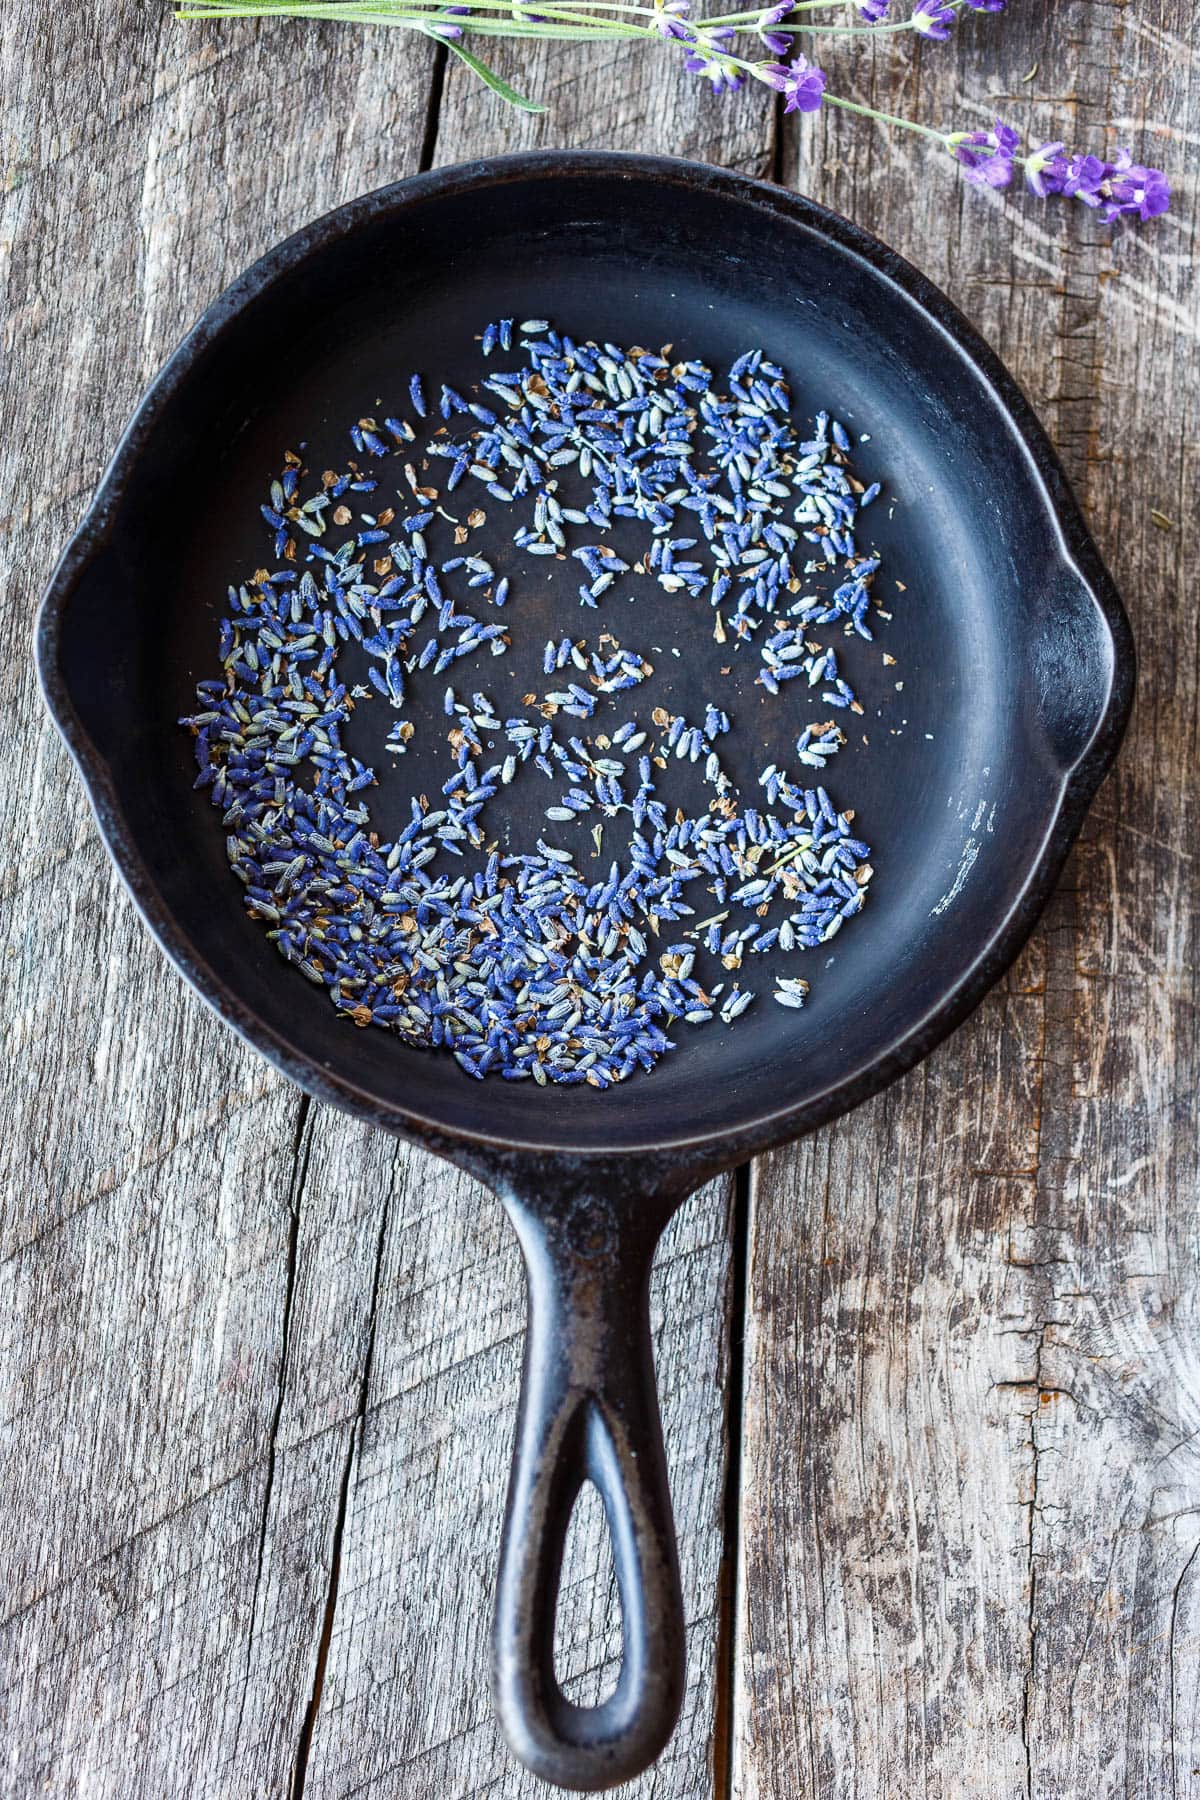 Roasting dried lavender in a cast iron skillet to quell some of the floral notes